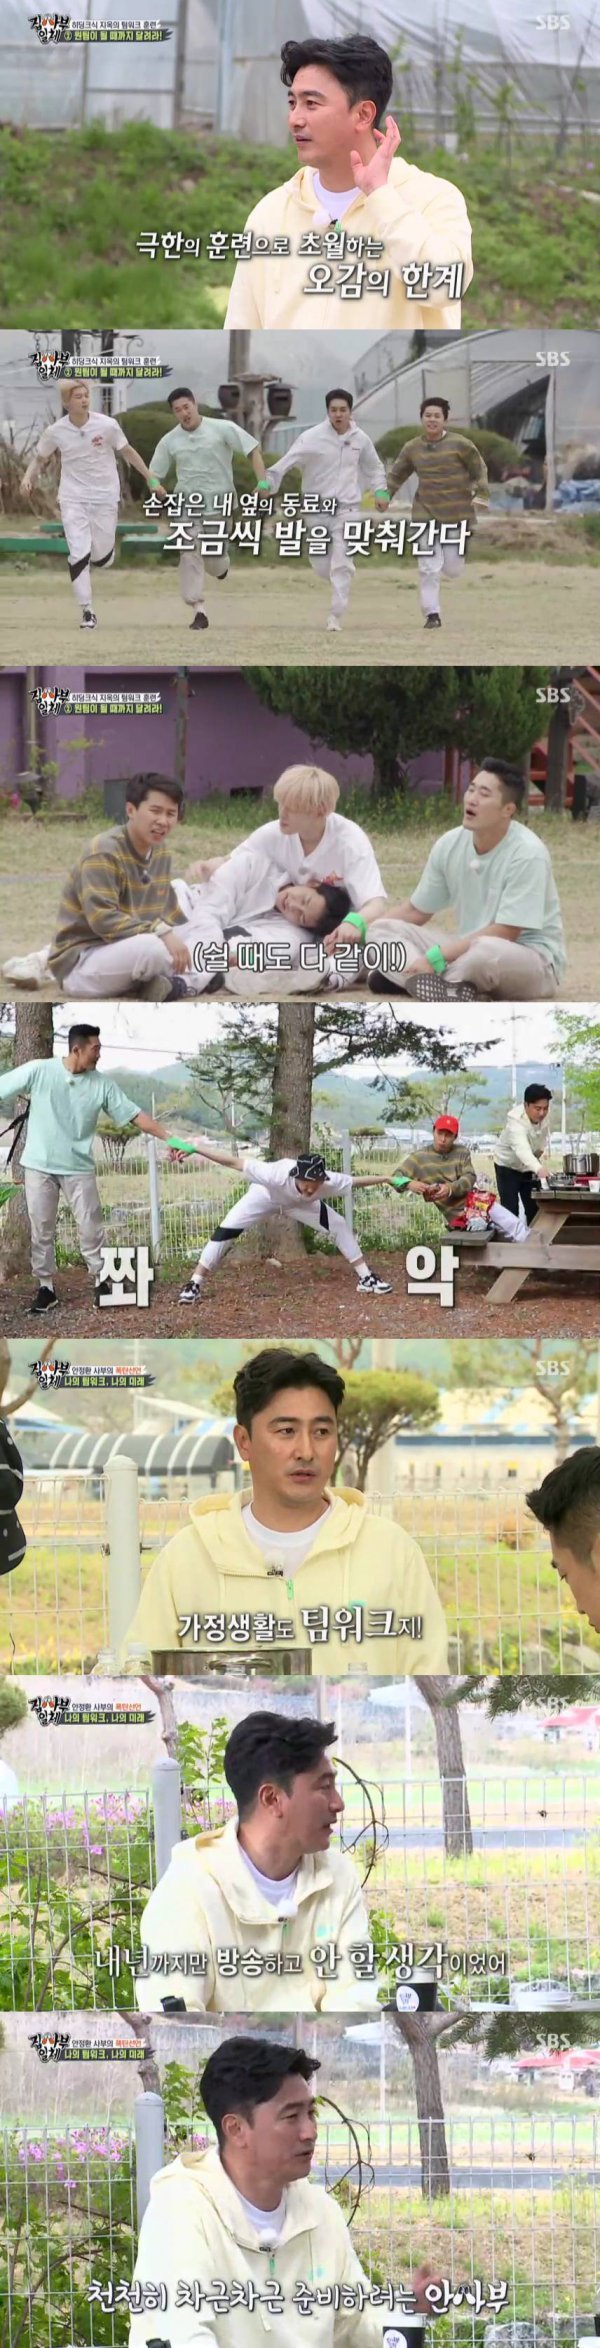 SBS All The Butlers master Ahn Jung-hwan revealed his teamwork training, which was Initiated by Hiddink during his national team, and he was interested in his future dreams with surprise confessions.According to Nielsen Korea, a ratings agency on the 17th, the ratings of households in the Seoul metropolitan area of SBS All The Butlers, which was broadcast on the 16th, continued to rise to 5.3% in the first part and 6.1% in the second part.The topic and competitiveness index, the 2049 target audience rating, also rose to 3.4%, and the highest audience rating per minute was 7.3%.On this day, Master Ahn Jung-hwan prepared for the teamwork training that was initiated by Hiddink during the national team.The members were given a ball to watch, and four people challenged to run in 150m 20 seconds. The members were laughing with their personal play.In addition, Ahn Jung-hwan said, We are so hard, but it seems to have been harder when we were players. Ahn Jung-hwan replied, It was so hard that I had to bury my pants without knowing it.If youre really tough, you hate the director at first, and then youre thinking about it, and youre going to get it, added Ahn Jung-hwan.On the other hand, the members were less physical as the training was repeated, but they were more and more enthusiastic.It was good to be a teamwork at the 2002 World Cup, said Ahn Jung-hwan, who recalled the time. The candidates sitting on the bench are very sick.But no one was impressed and angry, as if they were playing together. He said, Because he sacrificed himself and became a teamwork. Ahn Jung-hwan said, Not only the teamwork of the players but also the teamwork of the red devils were good, he said, the teamwork of the fans and the team, the teamwork of the whole people was good.In particular, Ahn Jung-hwan asked the members who asked for the future direction, saying, I originally intended to broadcast it until next year.I dont know if Im going back to football or studying or continuing to broadcast, but my plan is so, said Ahn Jung-hwan, who surprised everyone on the scene.Ahn Jung-hwan said, I am not better than four people except soccer. He said, I will study for leaders, but I want to learn many things.The members then offered a one-on-four penalty shoot-out to Master Ahn Jung-hwan.When the members win, they leave immediately, and when Ahn Jung-hwan wins, they are trained in extreme teamwork. Ahn Jung-hwan expressed confidence that he would I will only kick you with my left foot.However, unlike everyones expectation, the All The Butlers team won a dramatic victory.The members cheered after scoring the winning goal and untied the wristband that tied each other, and Cha Eun-woo followed Ahn Jung-hwans ring ceremony and laughed.Ahn Jung-hwan, who watched this, praised the teamwork of the members, saying, There is no greater individual than the team, he said. The most teamwork in Korean entertainment is not good.On the other hand, the members who were delighted like the actual game after the All The Butlers team scored the winning goal on the day laughed and won the best one minute with 7.3% of the audience rating per minute.